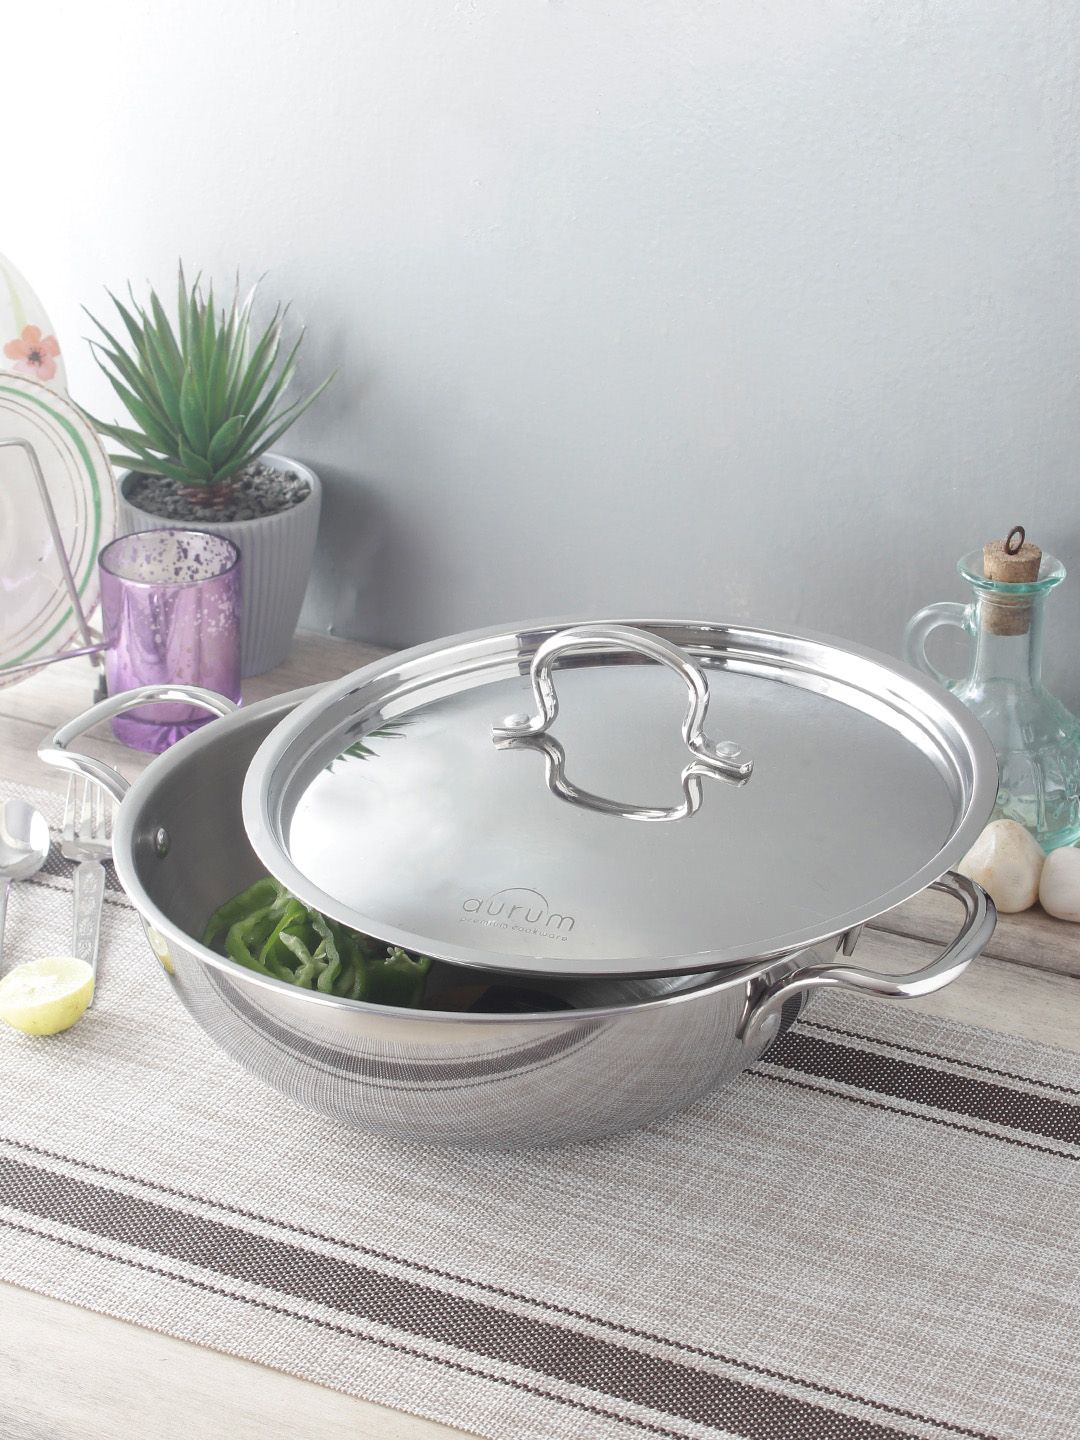 AURUM Silver-Toned Triply Kadai with Stainless Steel Lid 4.6 ltr Price in India